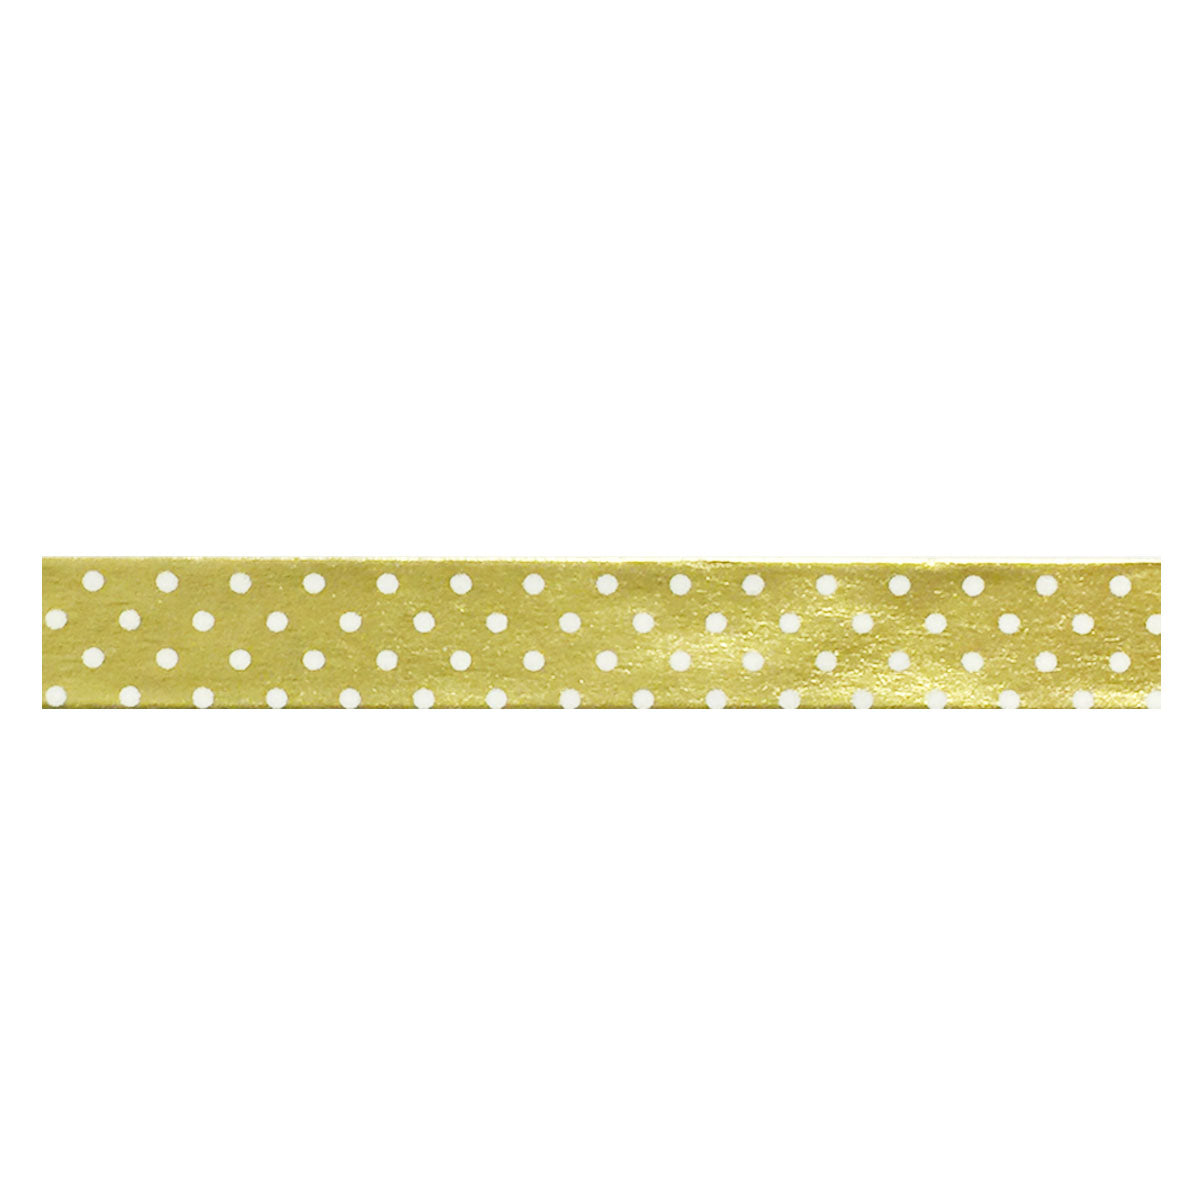 Wrapables Washi Masking Tape, Fun and Lively Group